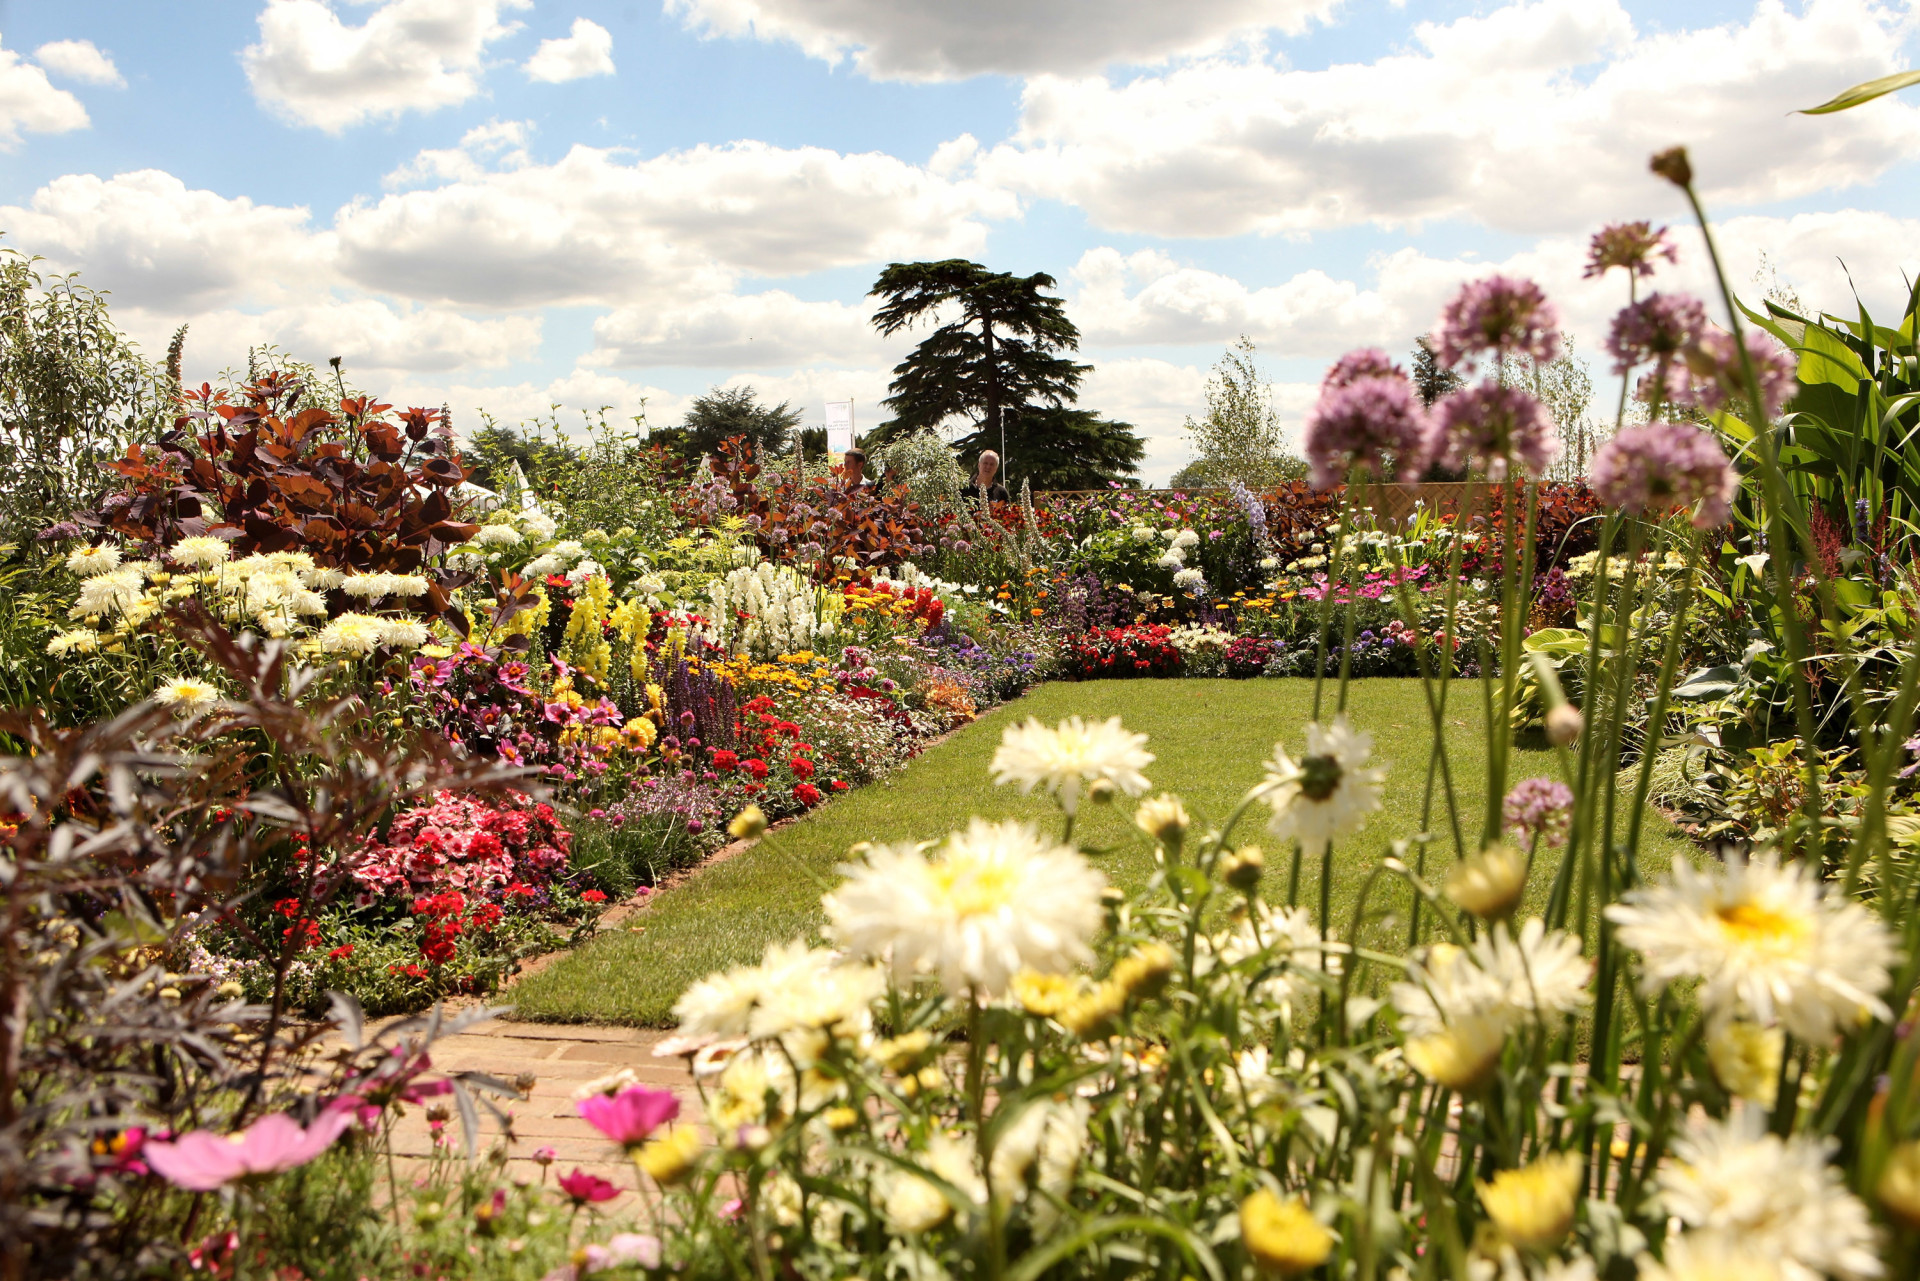 Visitors can get lost in the maze gardens surrounding Henry VIII’s famed palace.